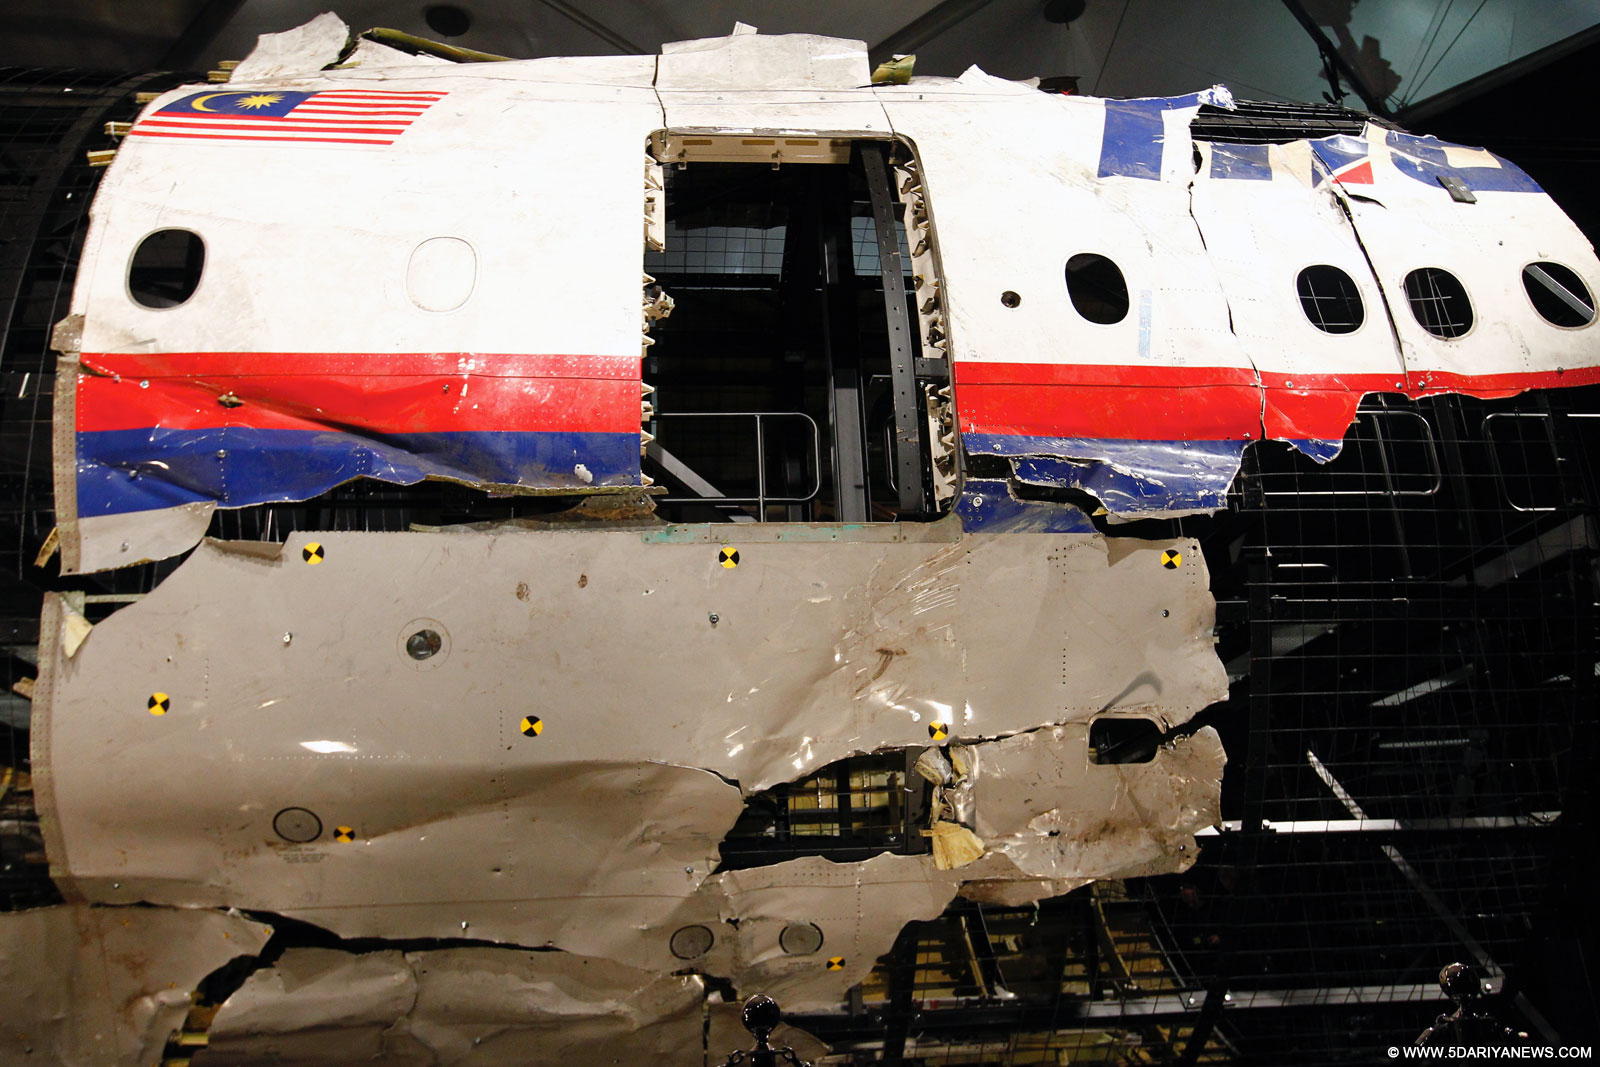 Wreckage of flight MH17 is seen after the presentation of the investigation report on the cause of its crash, at the Gilze-Rijen air base, the Netherlands